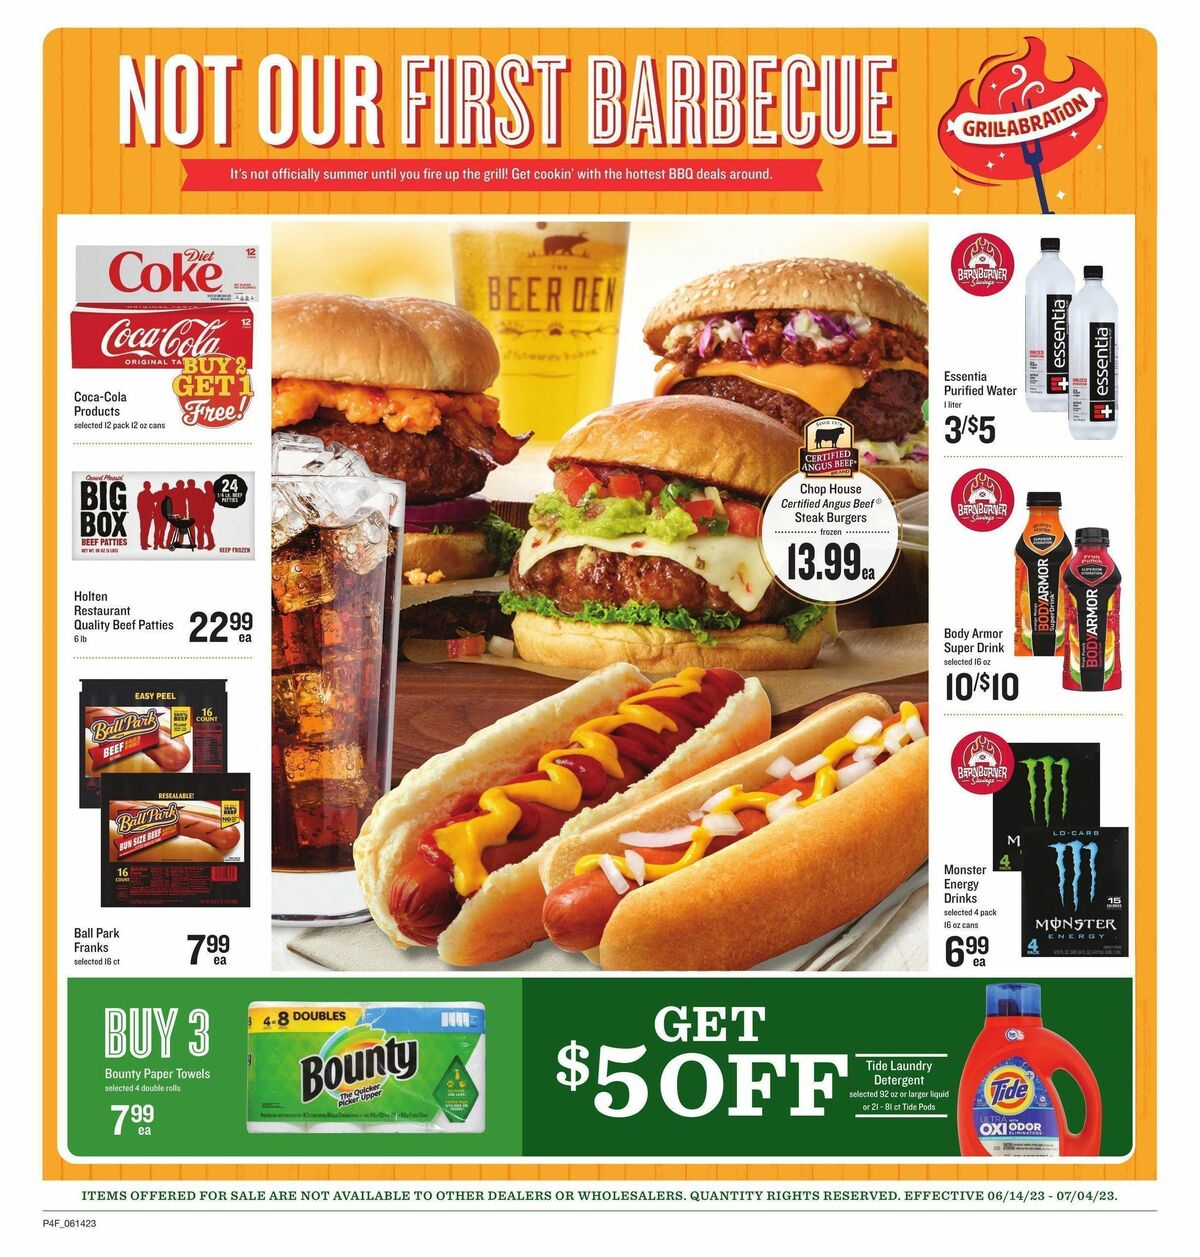 Lowes Foods Summer Grilling Weekly Ad from June 14